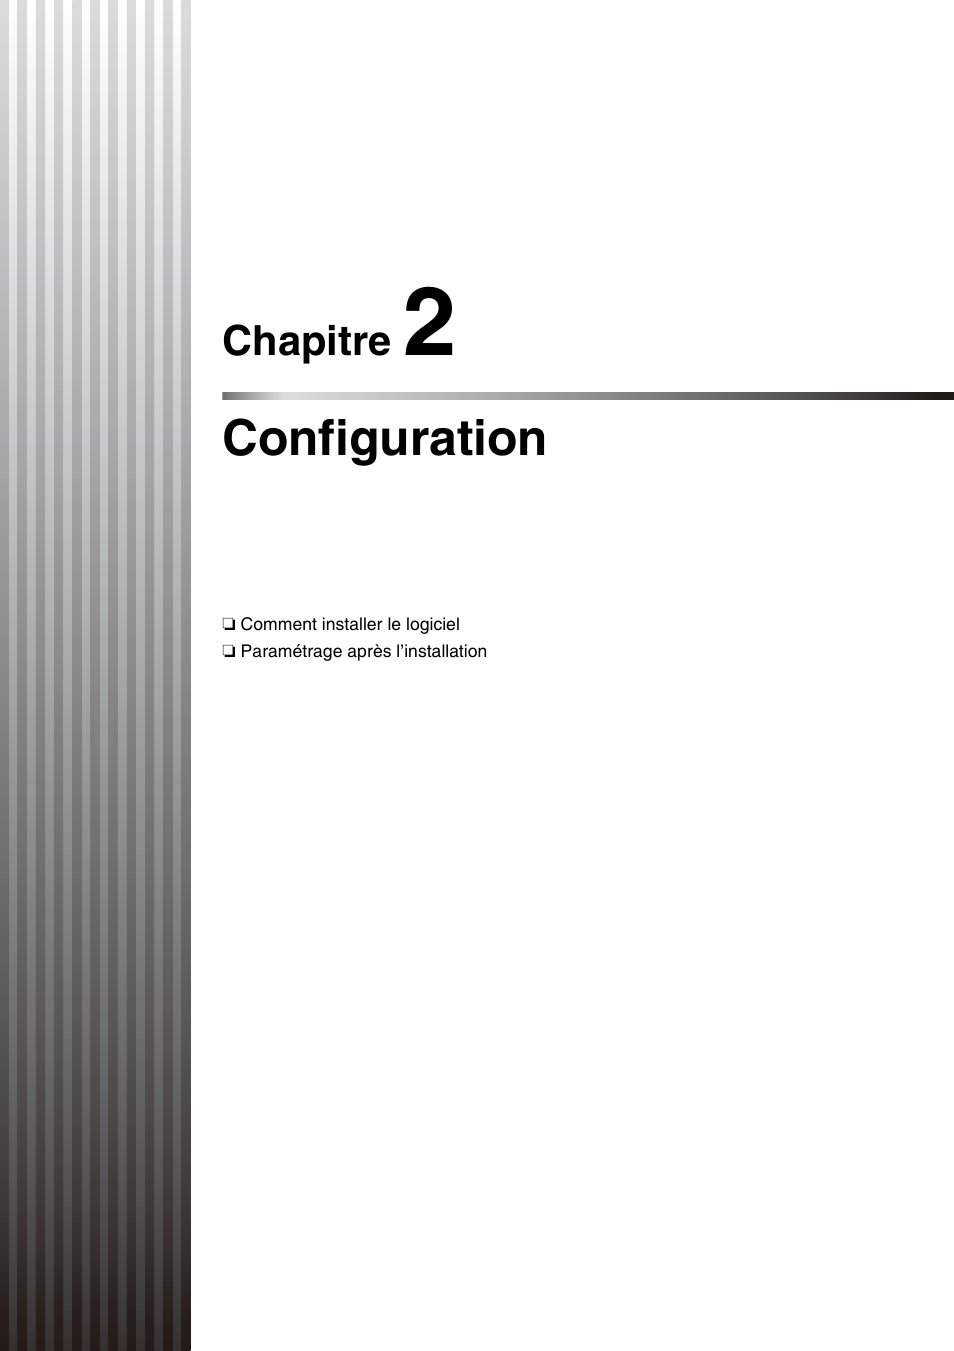 Chapitre 2 configuration, Chapitre 2: configuration, Chapitre | Configuration | Canon VB-H610D Manuel d'utilisation | Page 33 / 138